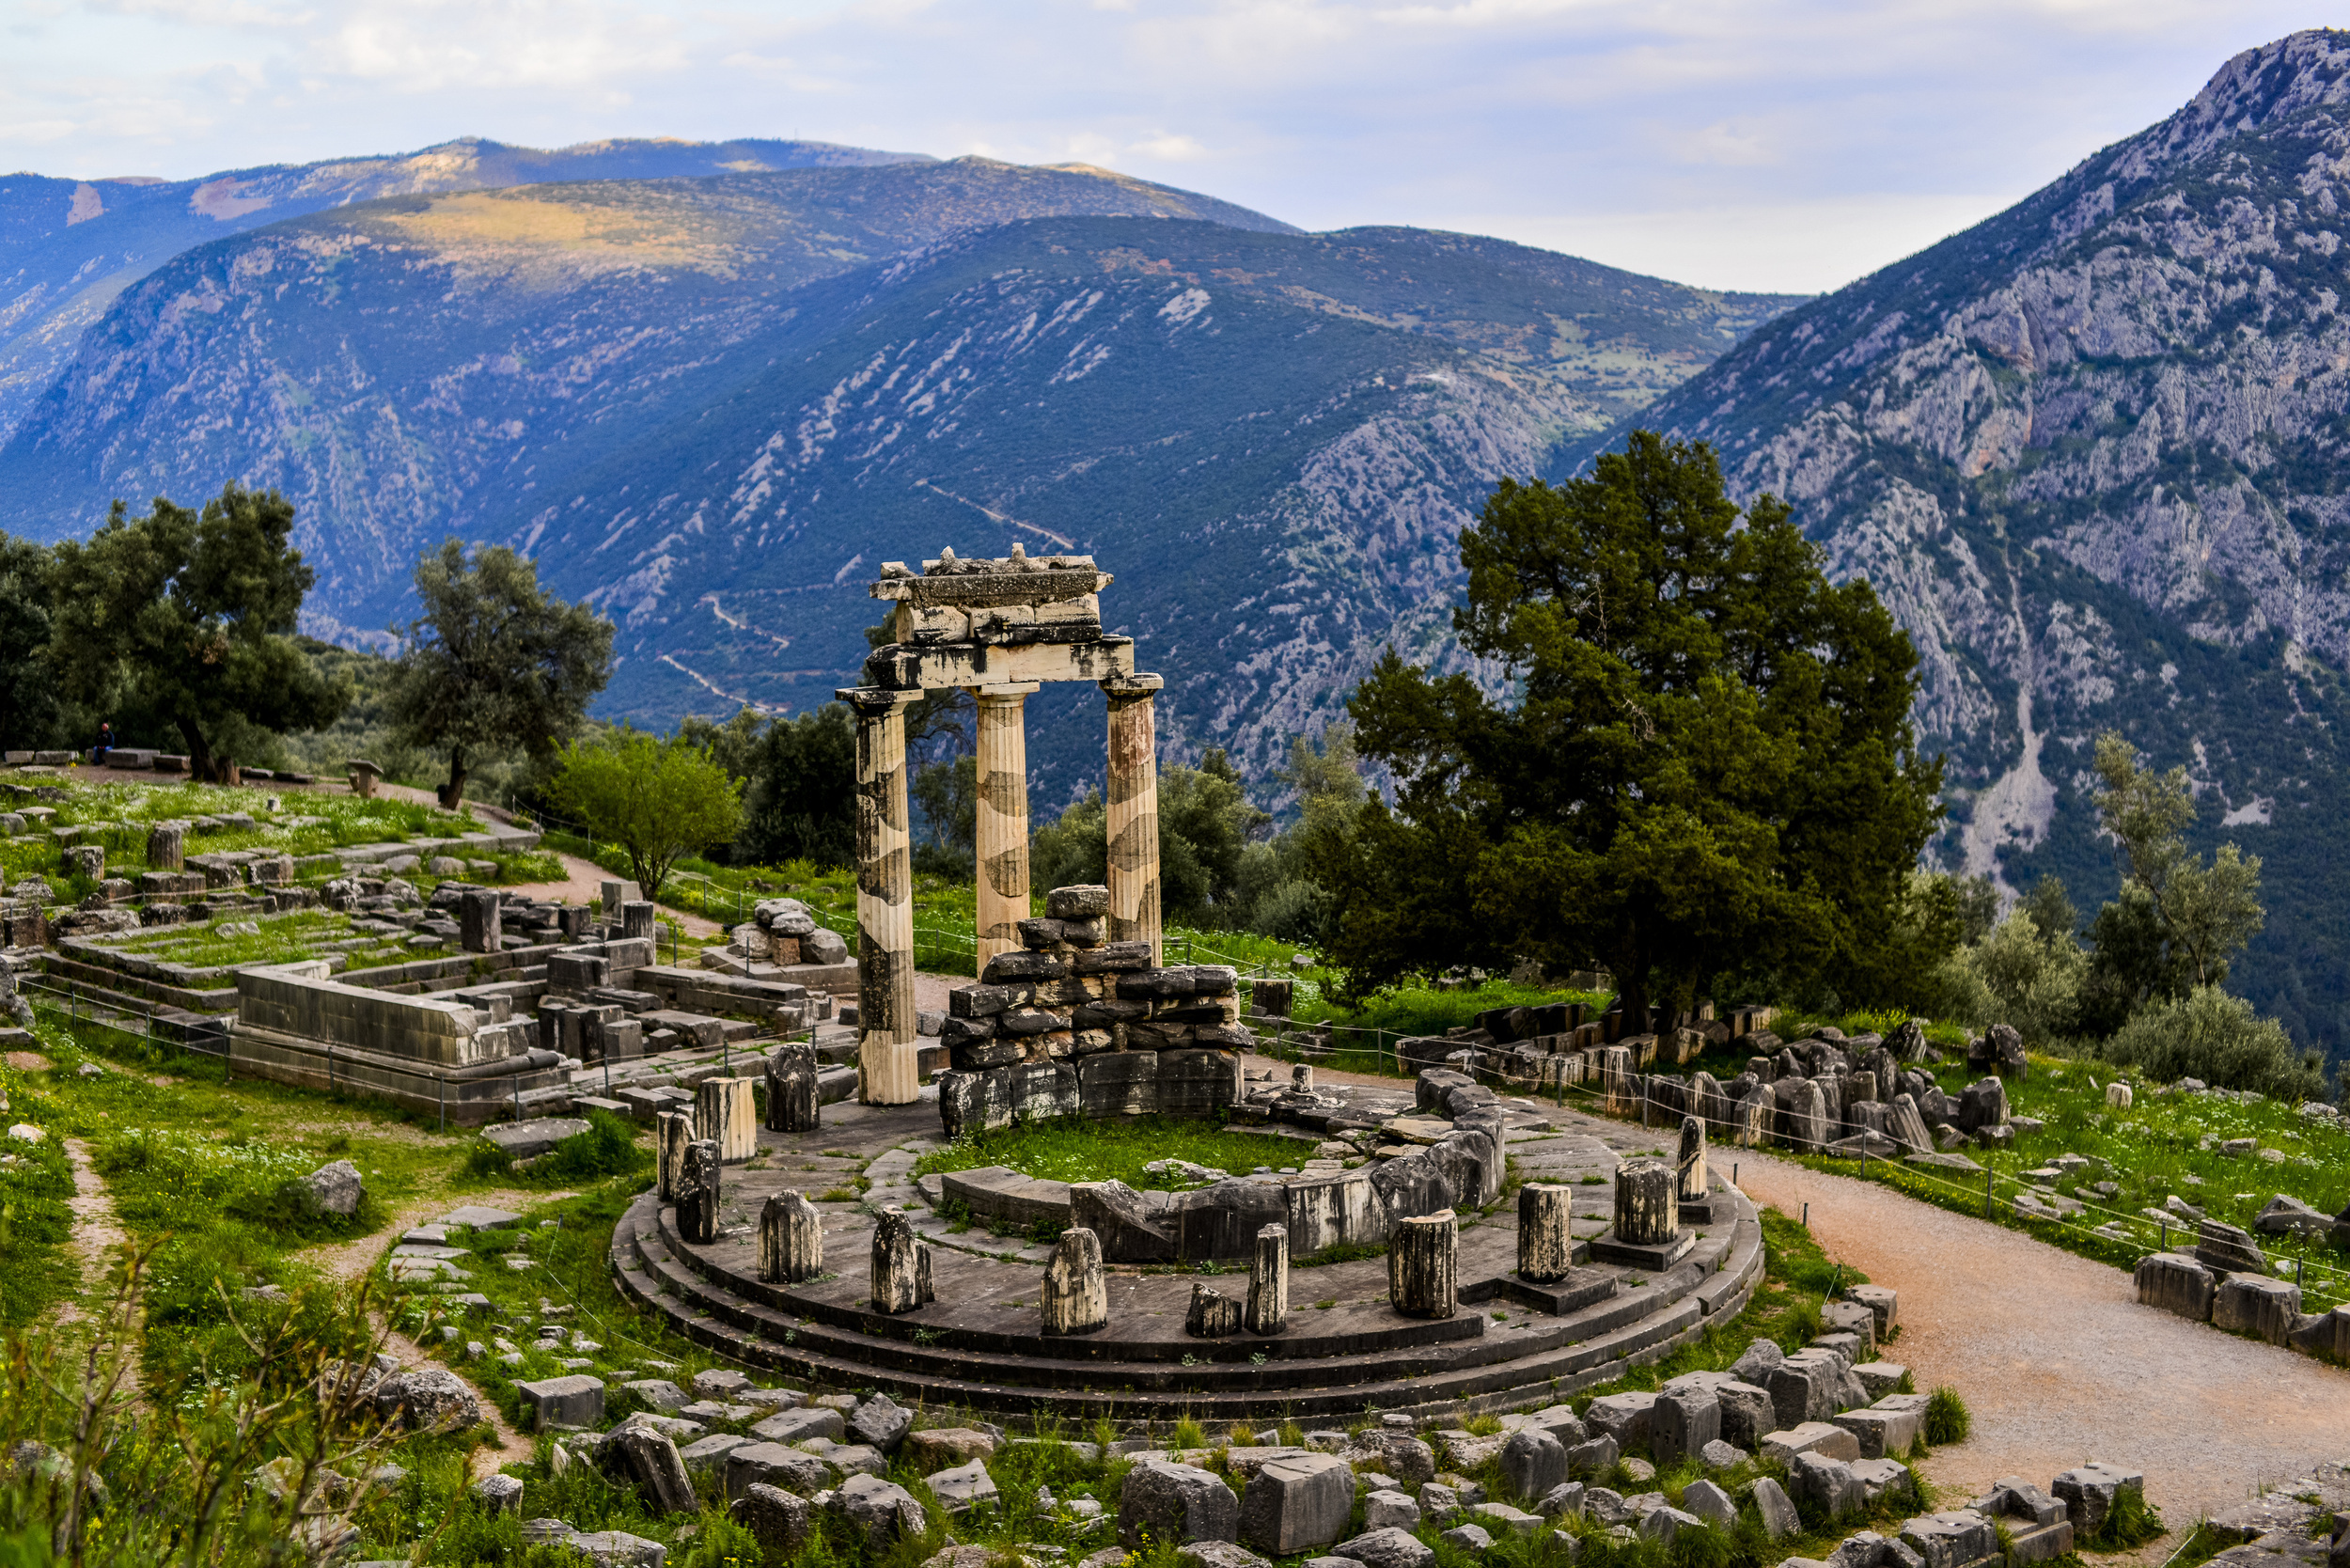 <p>This UNESCO World Heritage site is just a couple hours from the Greek capital. It’s a must-visit if you’re a history or archeology buff. In ancient times, the town was known as the home of the Oracle, Delphi, and a naval stronghold. These days, it houses some of the most impressive ruins in the country.</p><p>You may also like: <a href='https://www.yardbarker.com/lifestyle/articles/20_tips_that_will_keep_your_chicken_moist_on_the_grill_031524/s1__24181486'>20 tips that will keep your chicken moist on the grill</a></p>